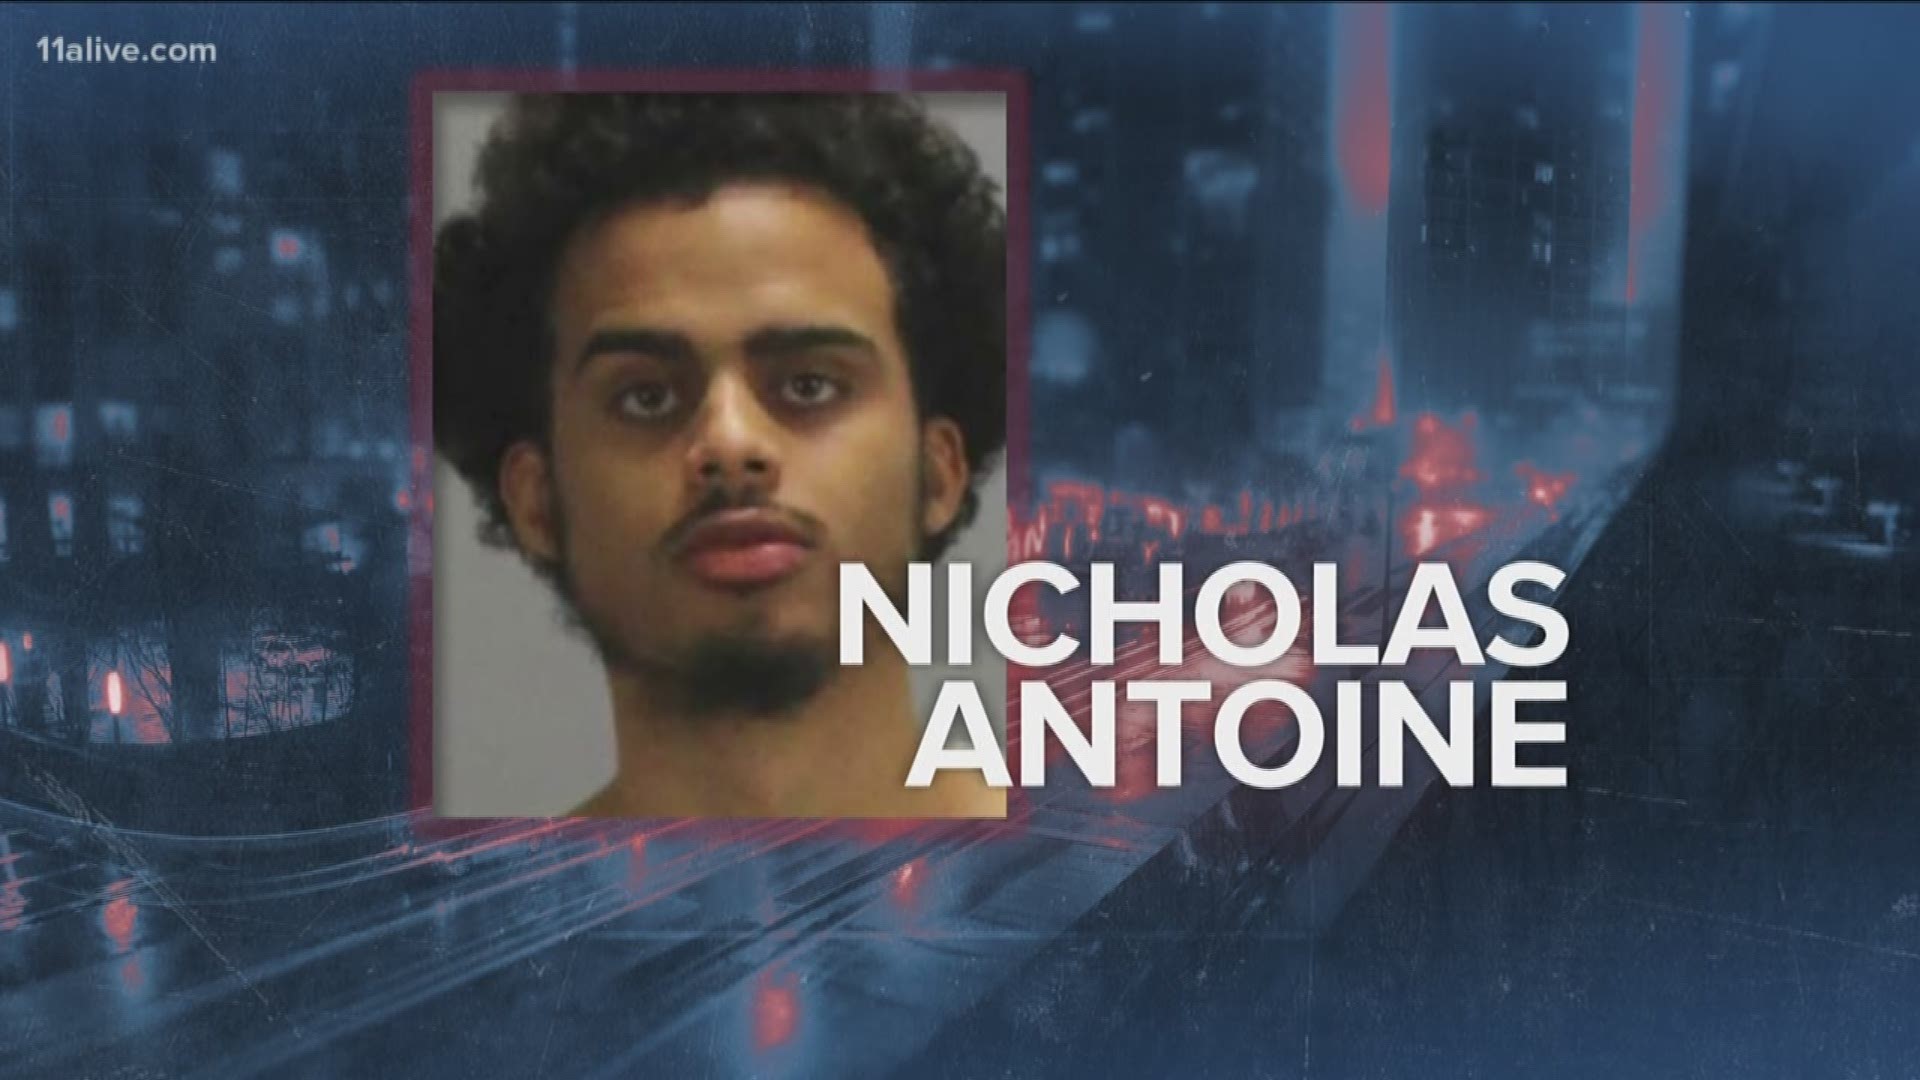 Nicholas Antoine was wanted in connection with deaths in Boston. Police found him in Hampton, Georgia.